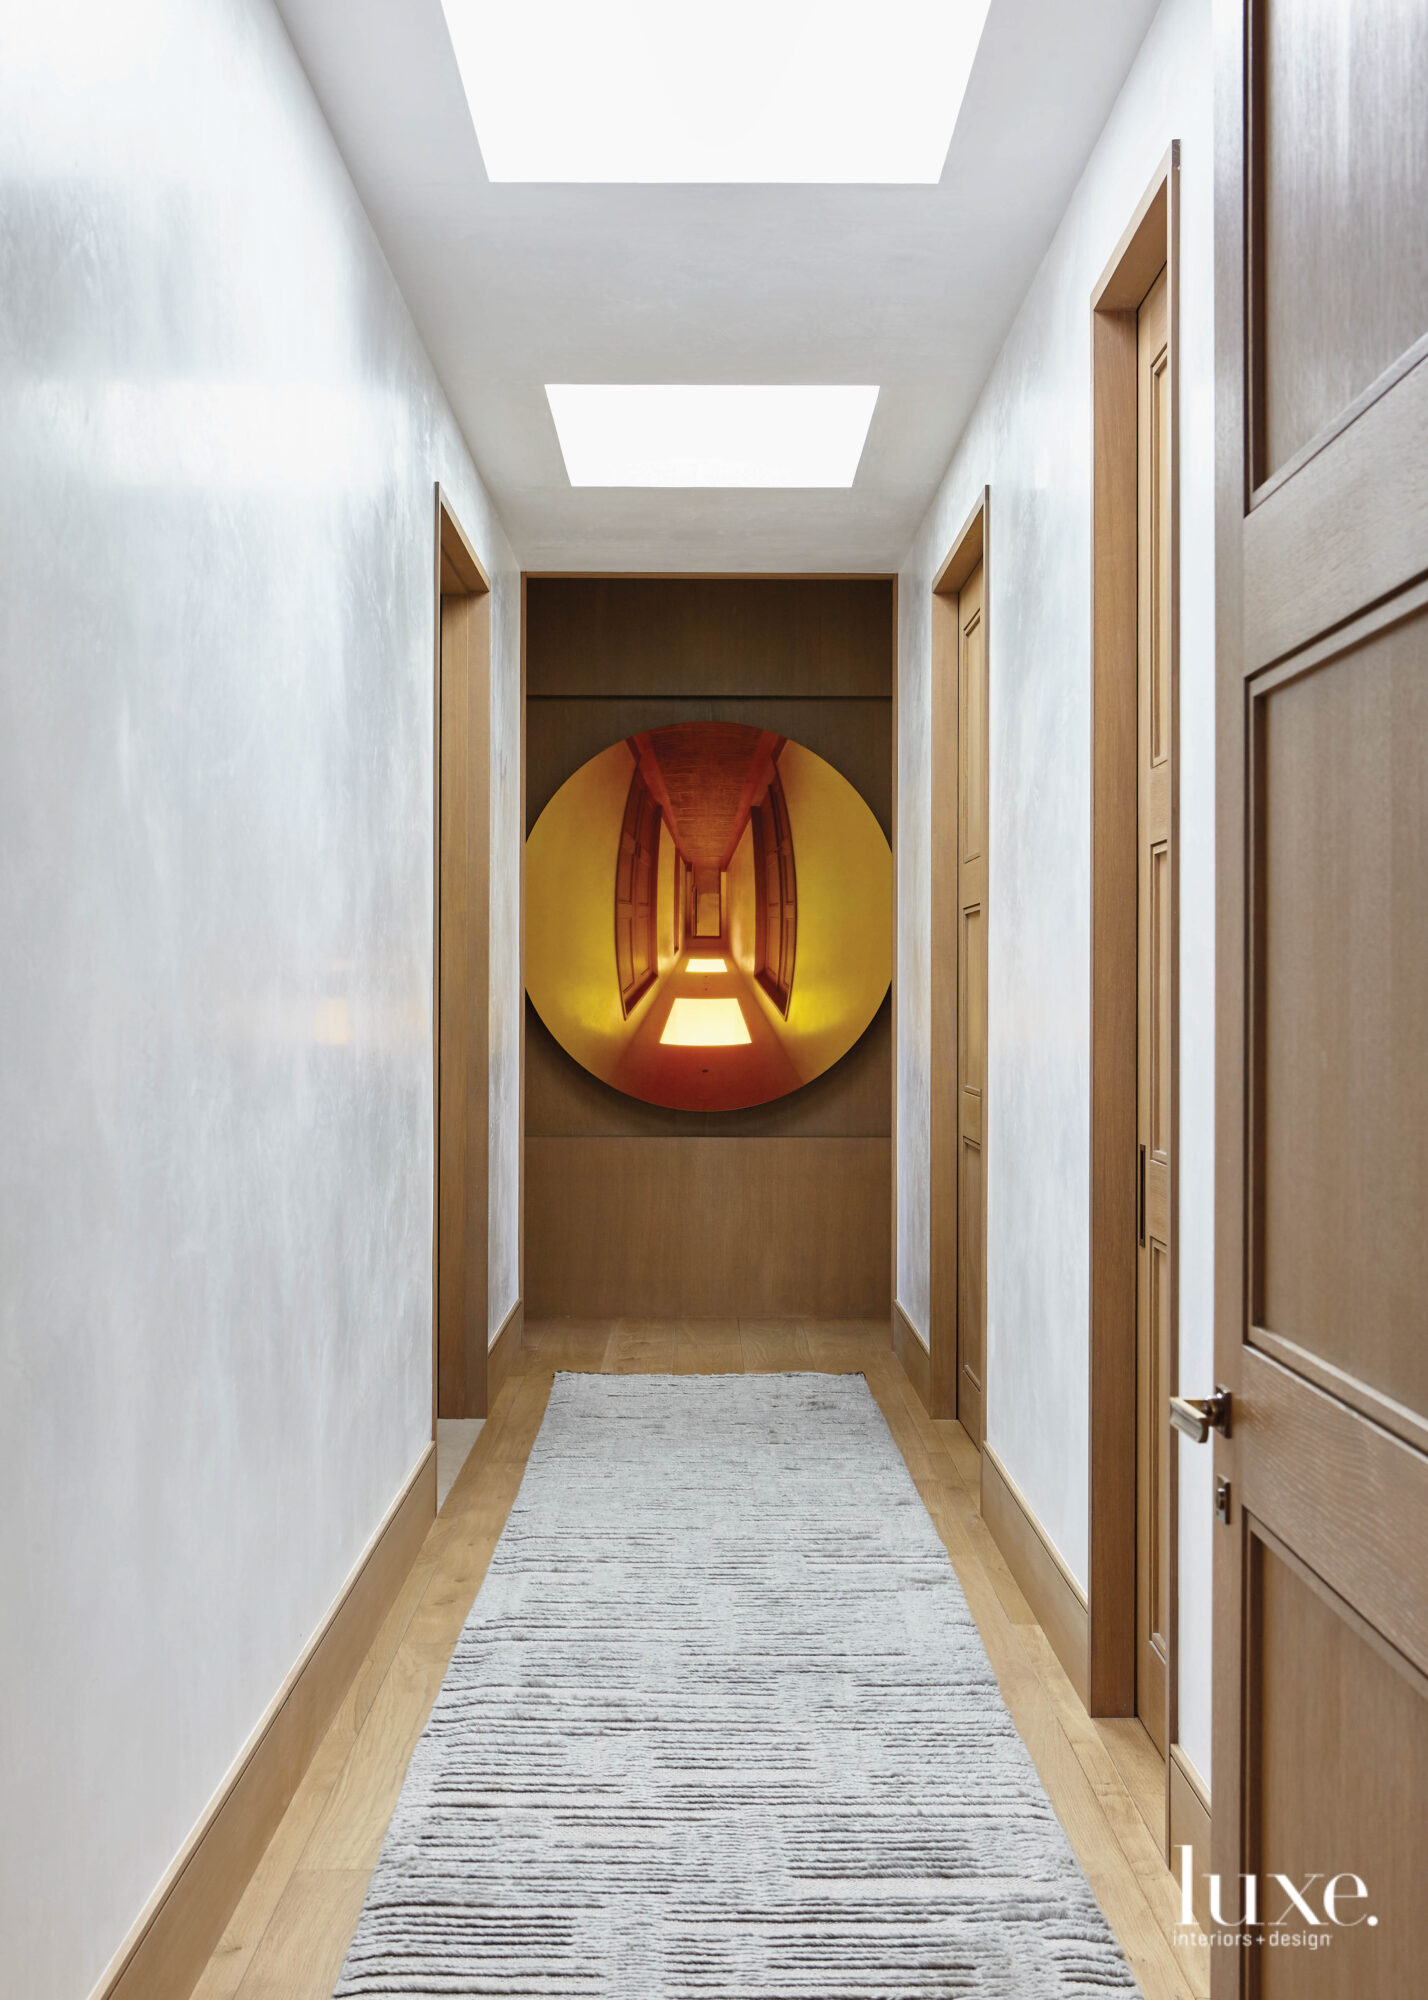 A hallway ends with a wall hung with a bronze mirror.